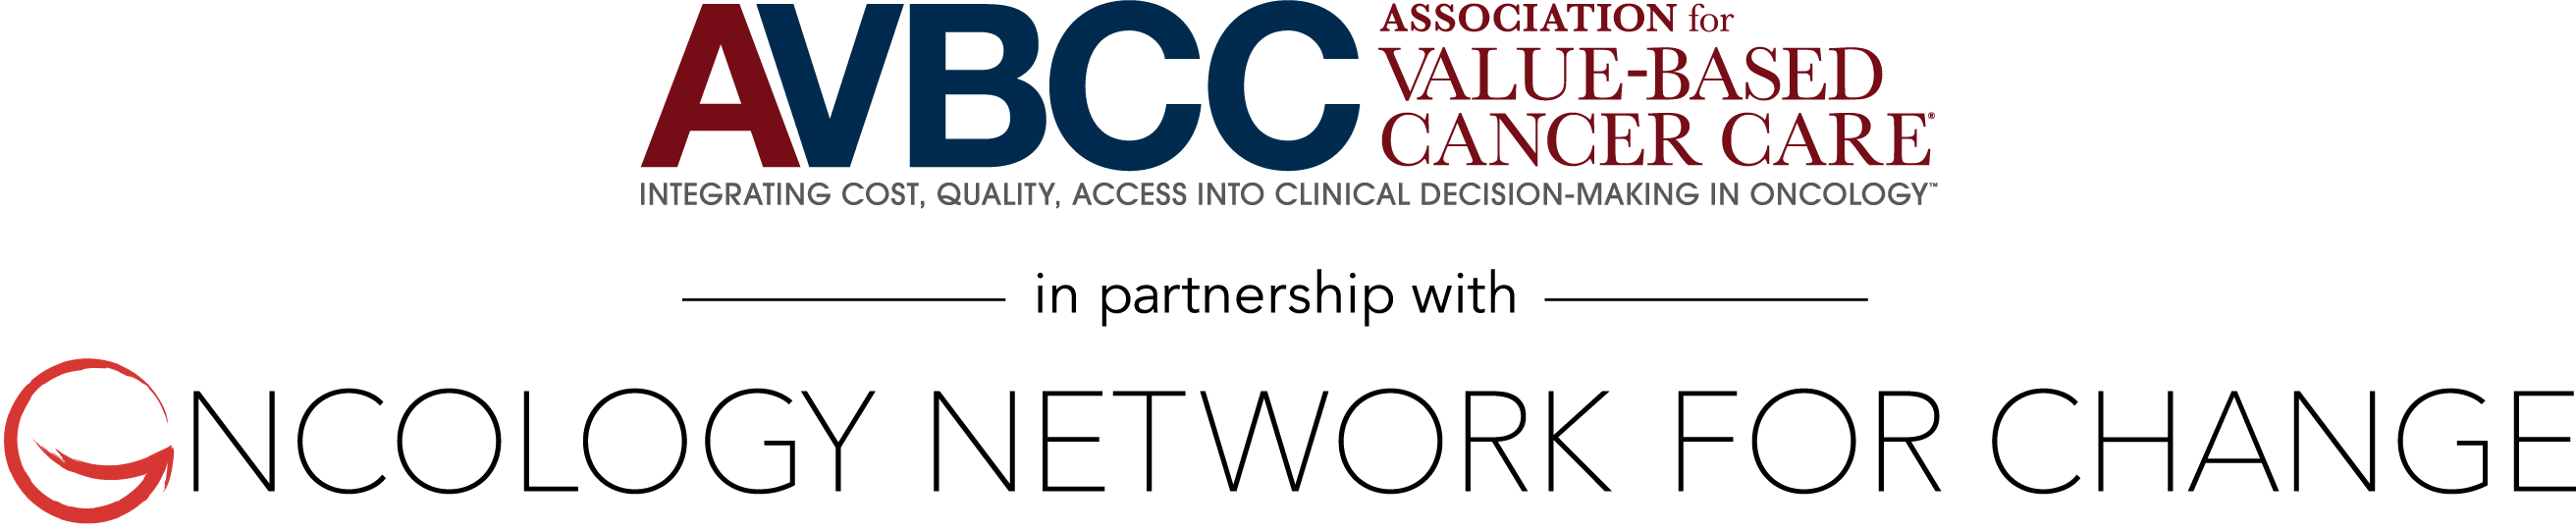 AVBCC and ONC